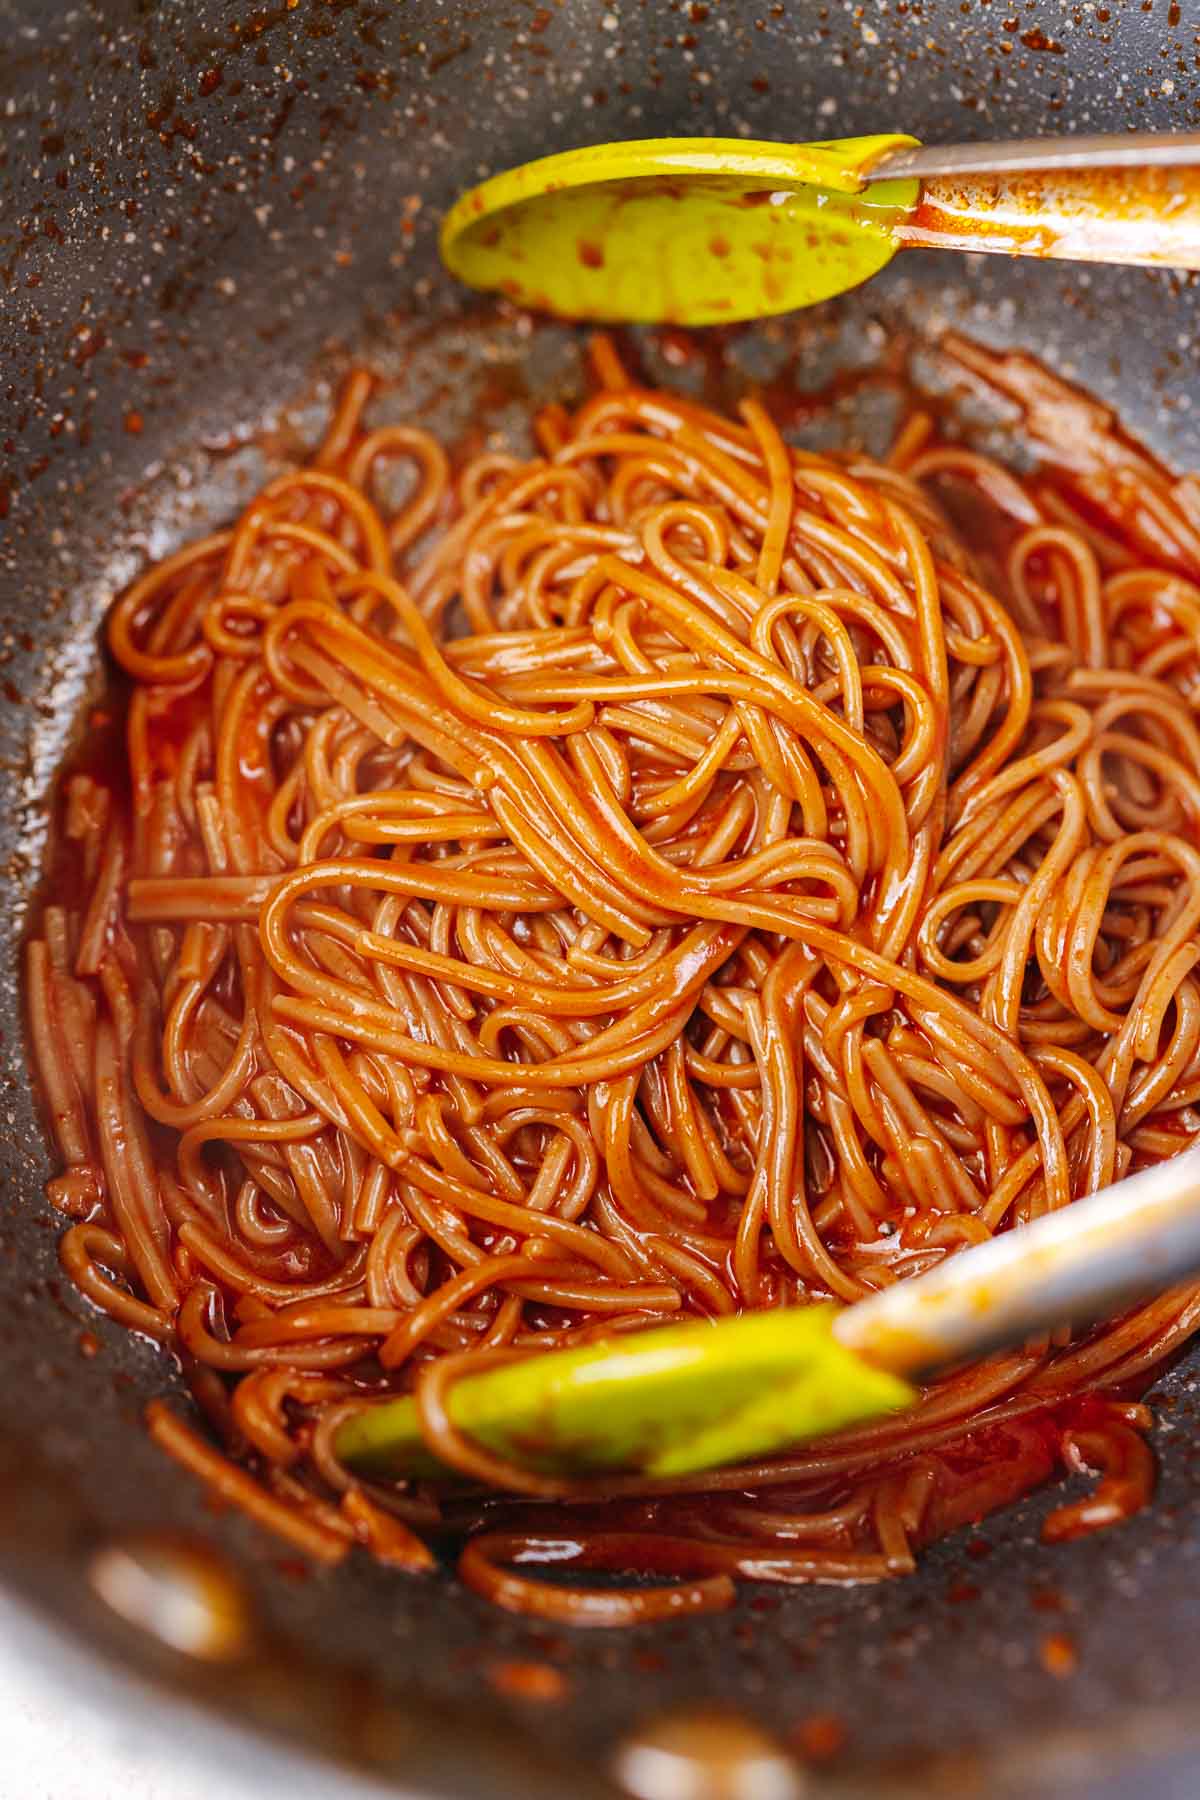 A large pot of noodles coated in a red sauce.